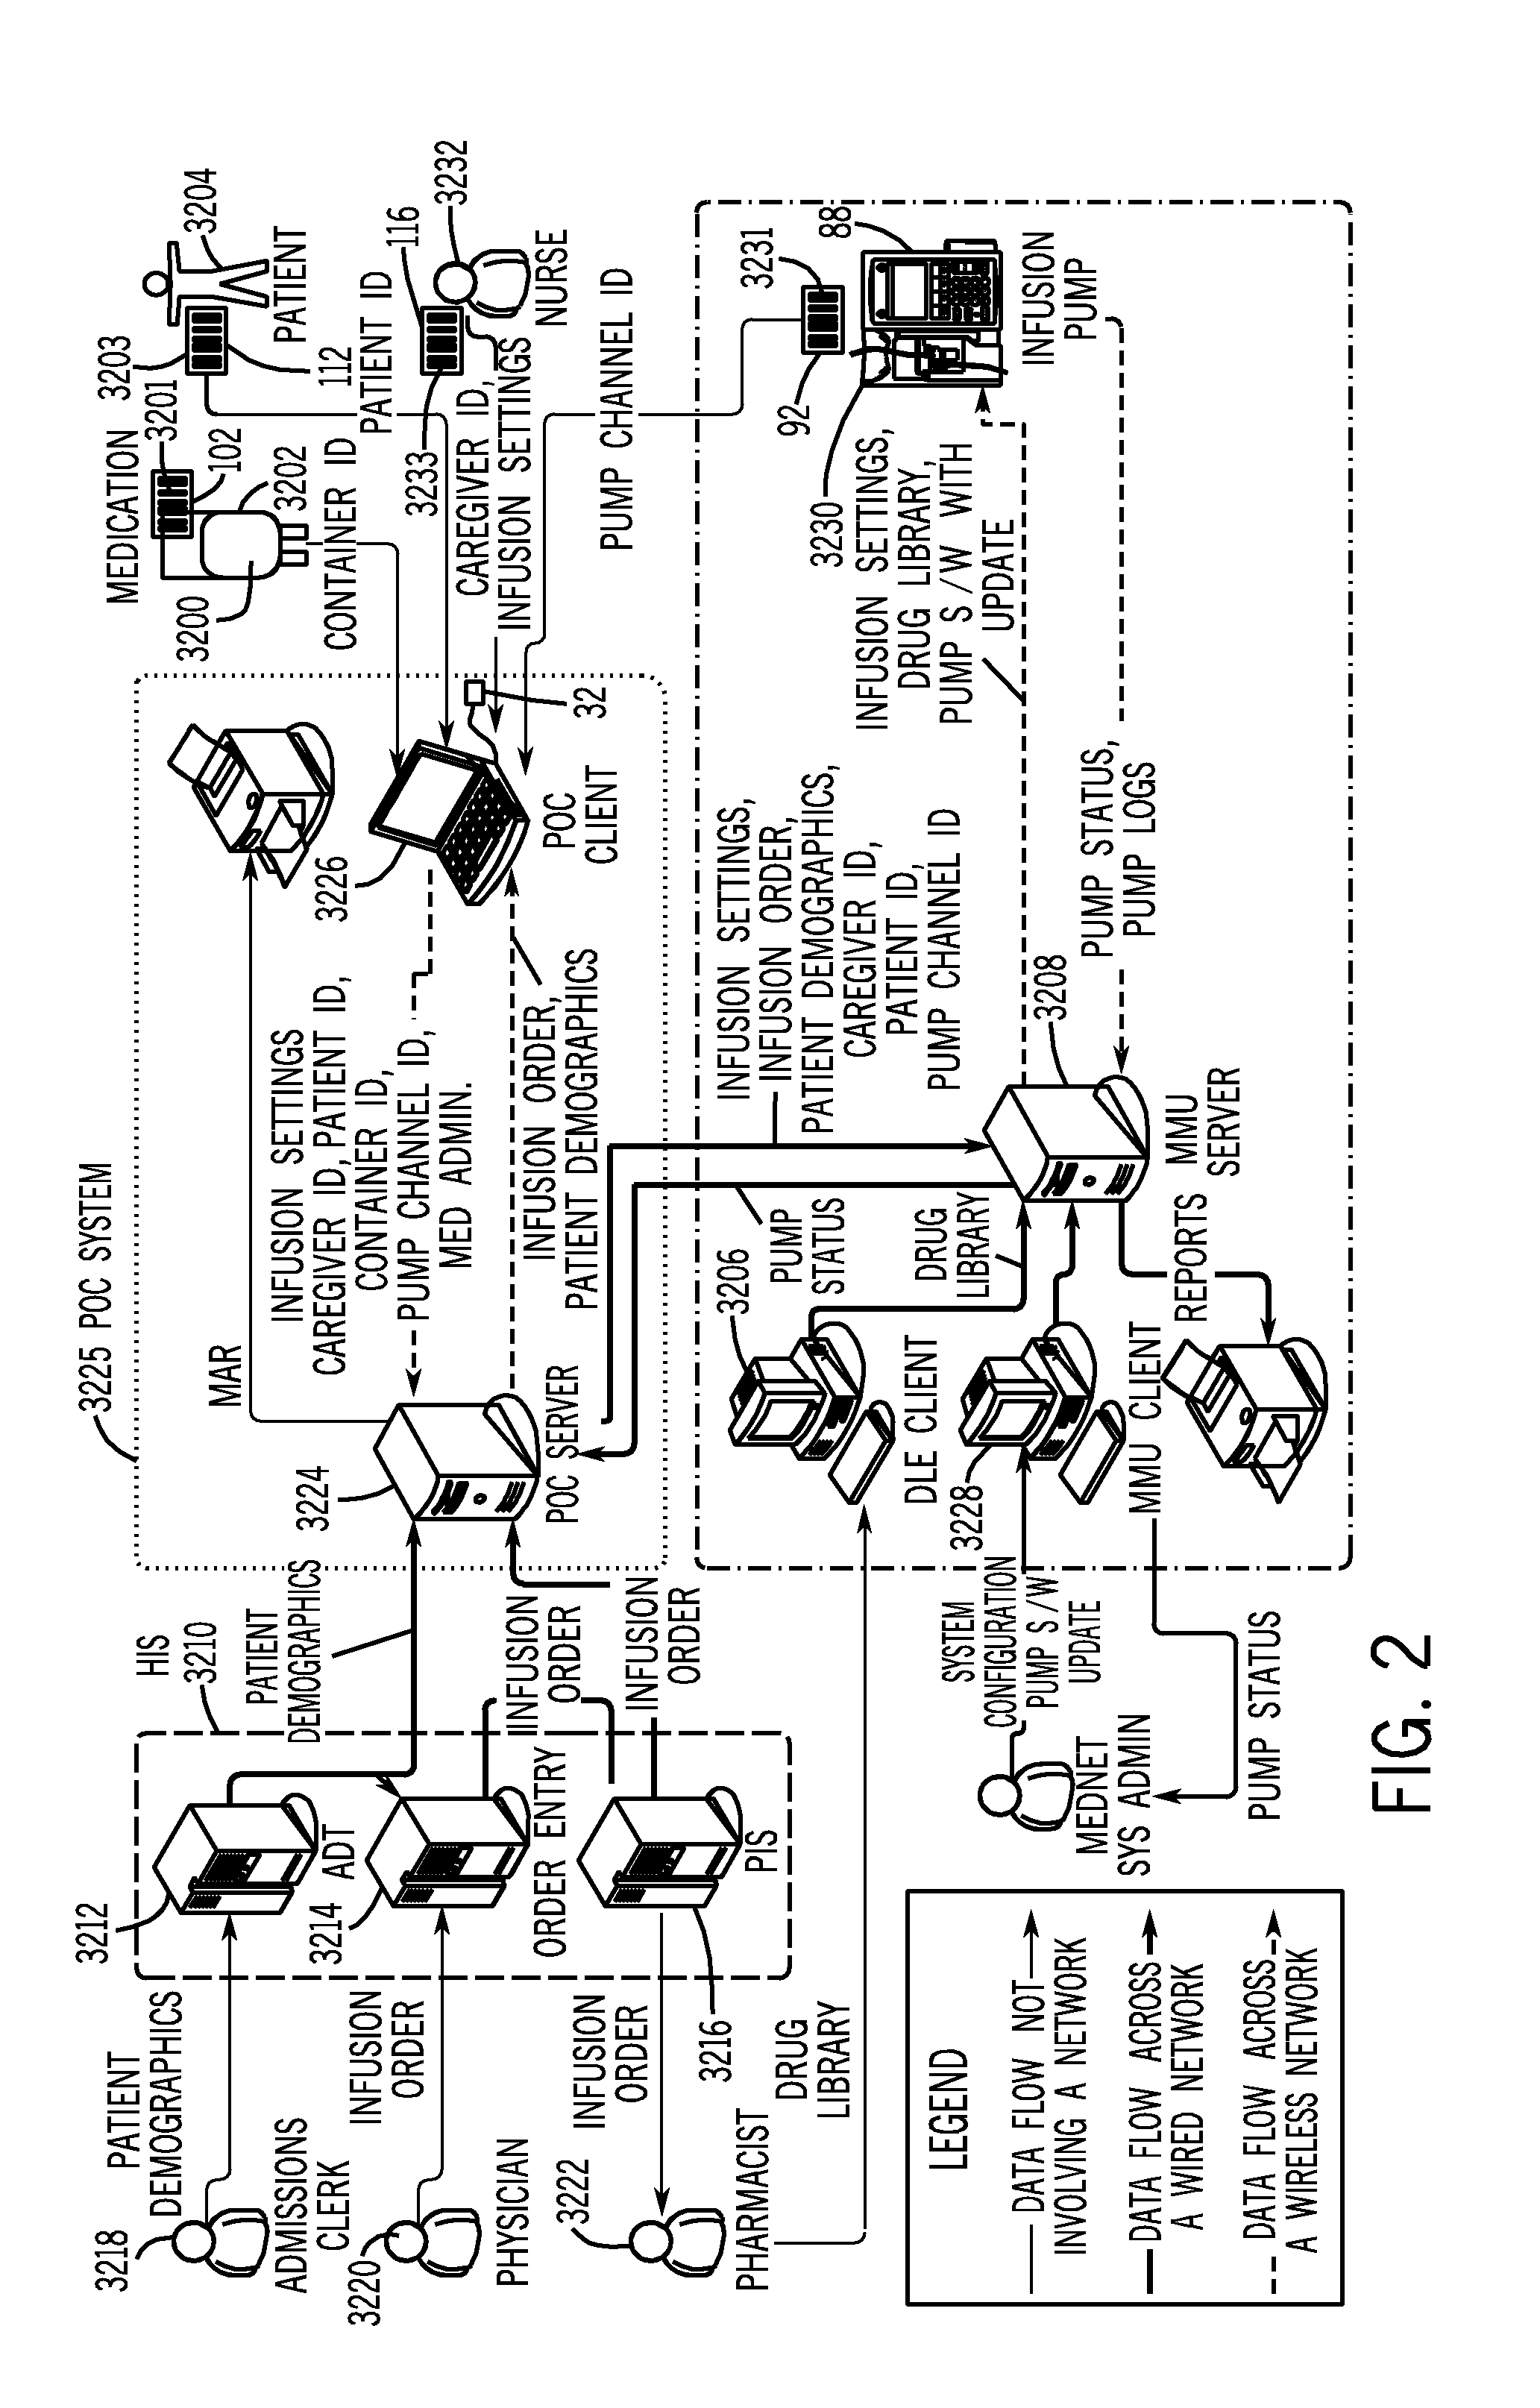 Medication administration and management system and method